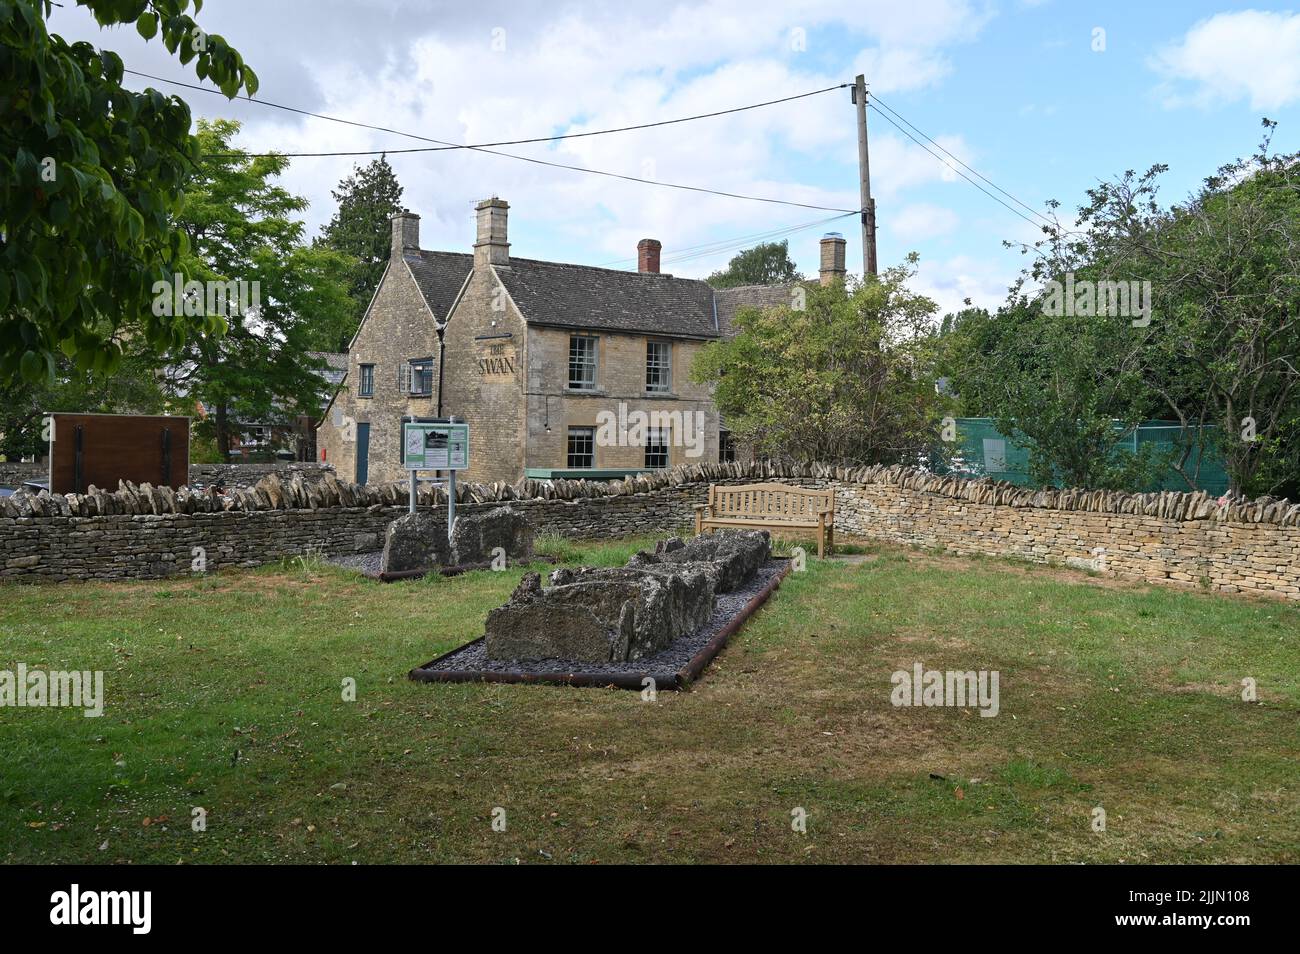 Village Pound in the Oxfordshire village of Ascott under Wychwood with the village public house The Swan in the rear. The stones are a memorial to the Stock Photo